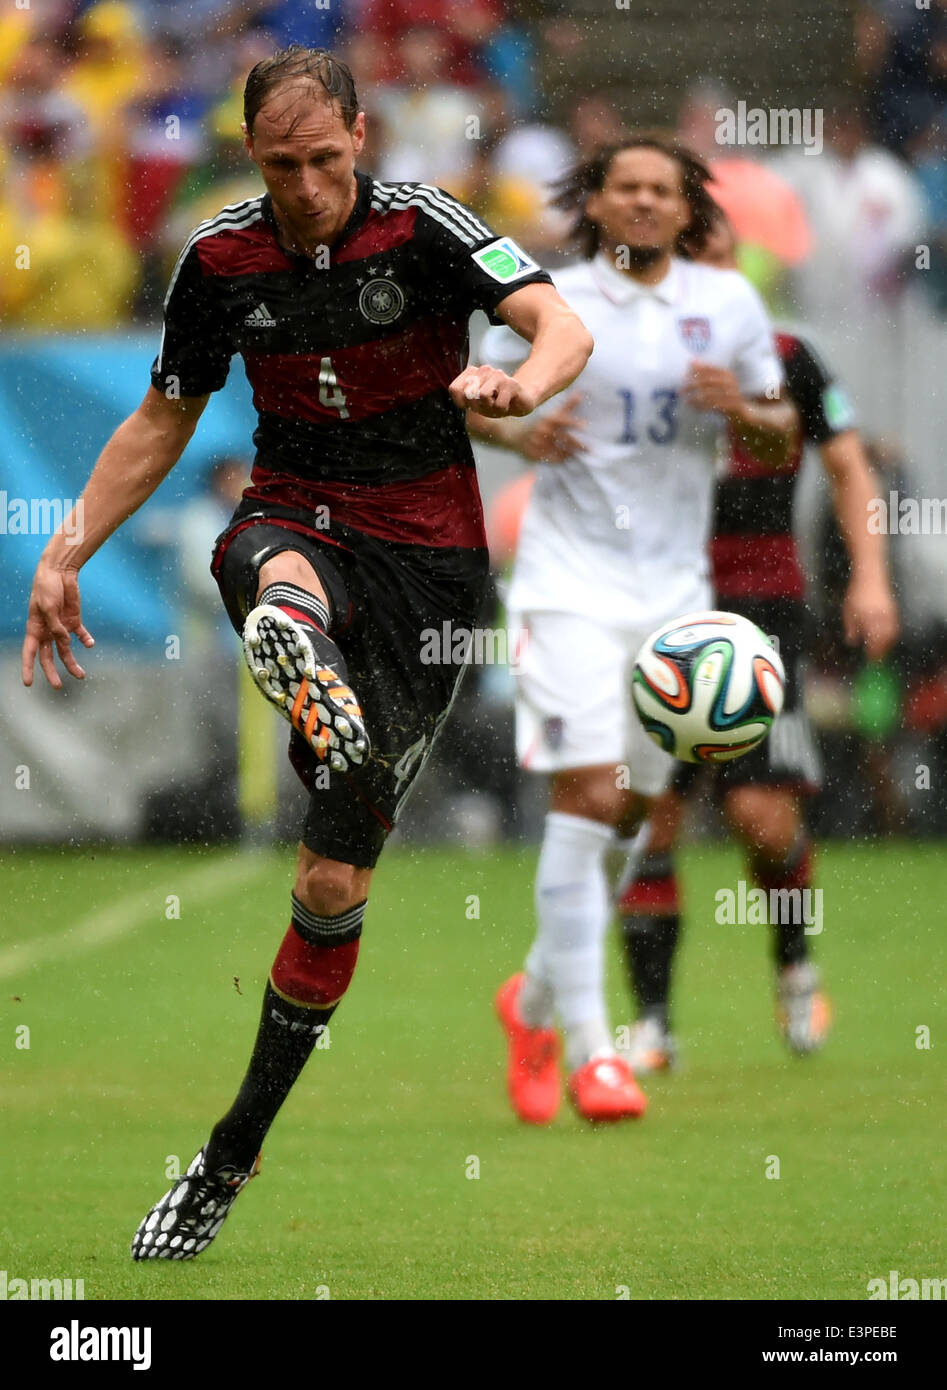 Recife, Brazil. 26th June, 2014. Germany's Benedikt Howedes (front) passes the ball during a Group G match between the U.S. and Germany of 2014 FIFA World Cup at the Arena Pernambuco Stadium in Recife, Brazil, on June 26, 2014. Credit:  Guo Yong/Xinhua/Alamy Live News Stock Photo